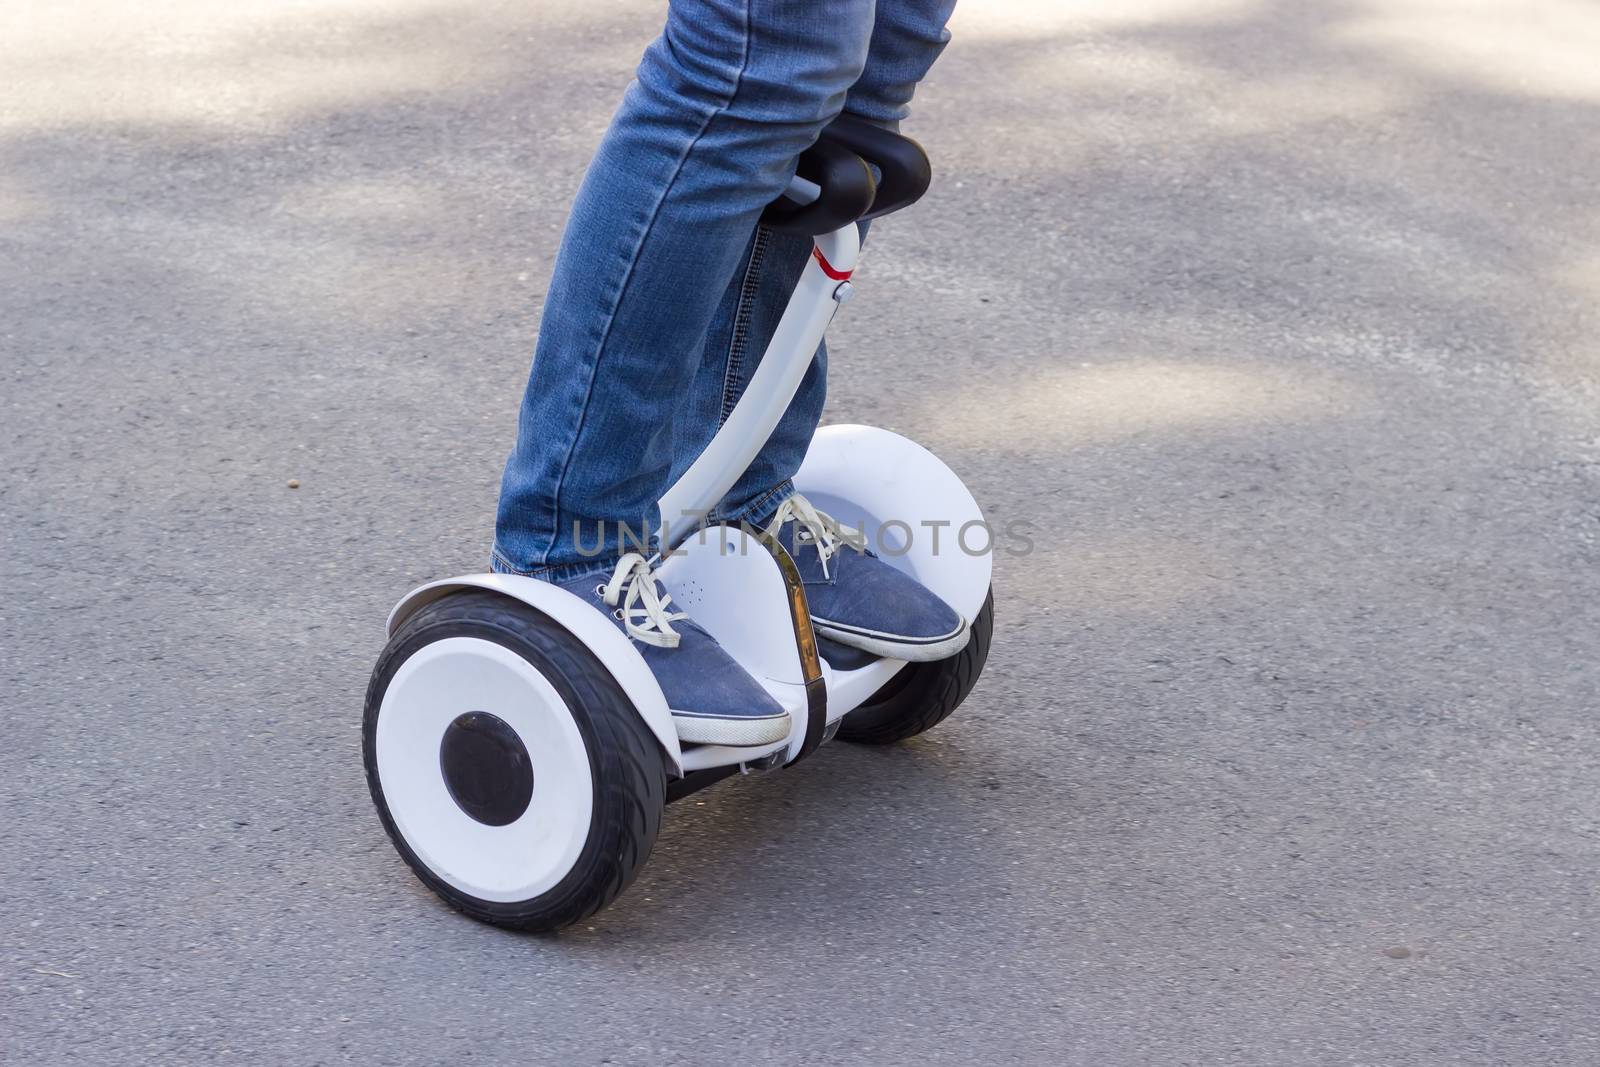 Legs of young man in blue jeans riding a segway on the asphalt walkway
